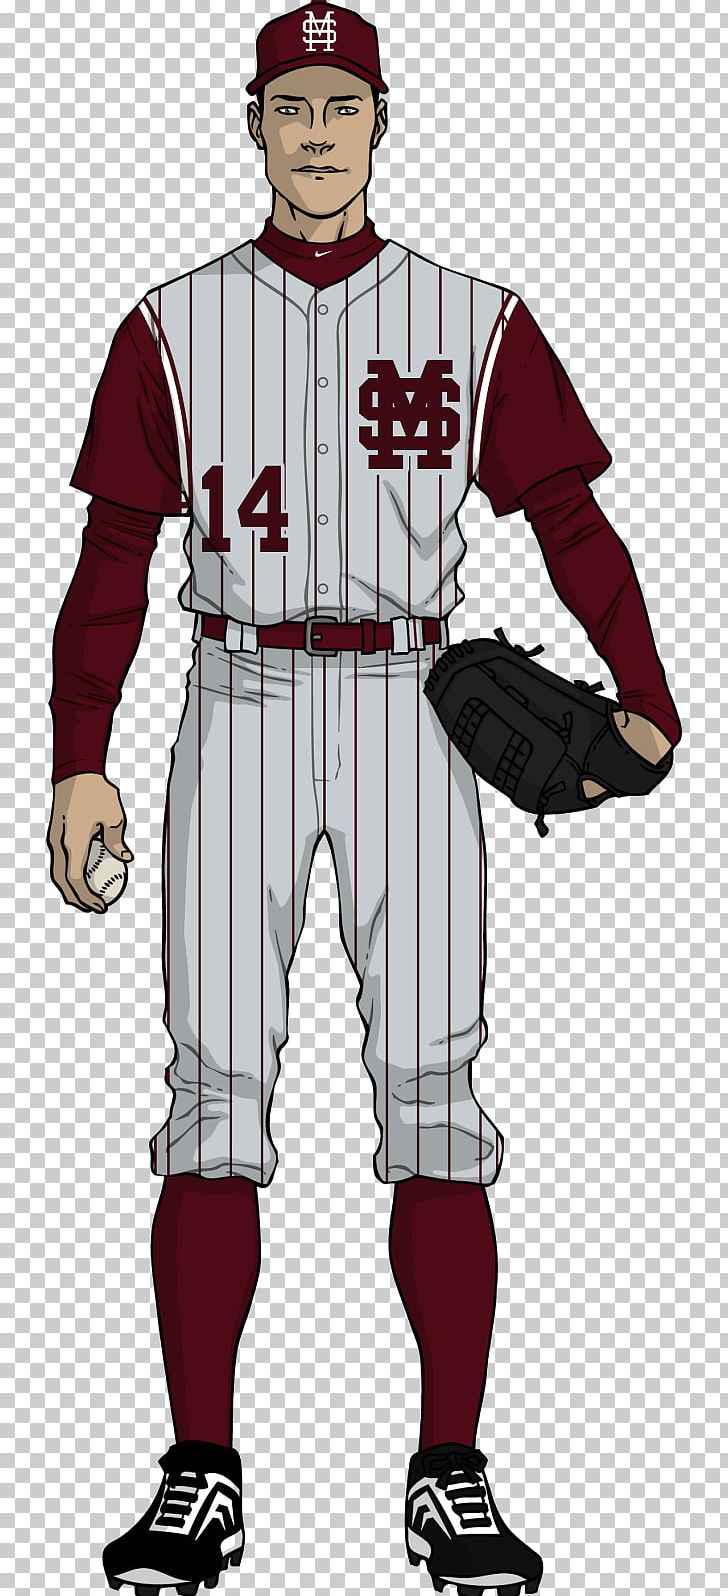 Baseball Uniform Ole Miss Rebels Football Ole Miss Rebels Baseball Mississippi State Bulldogs Football Mississippi State Bulldogs Baseball PNG, Clipart, Baseball, Baseball Uniform, Cartoon, Fictional Character, Jersey Free PNG Download